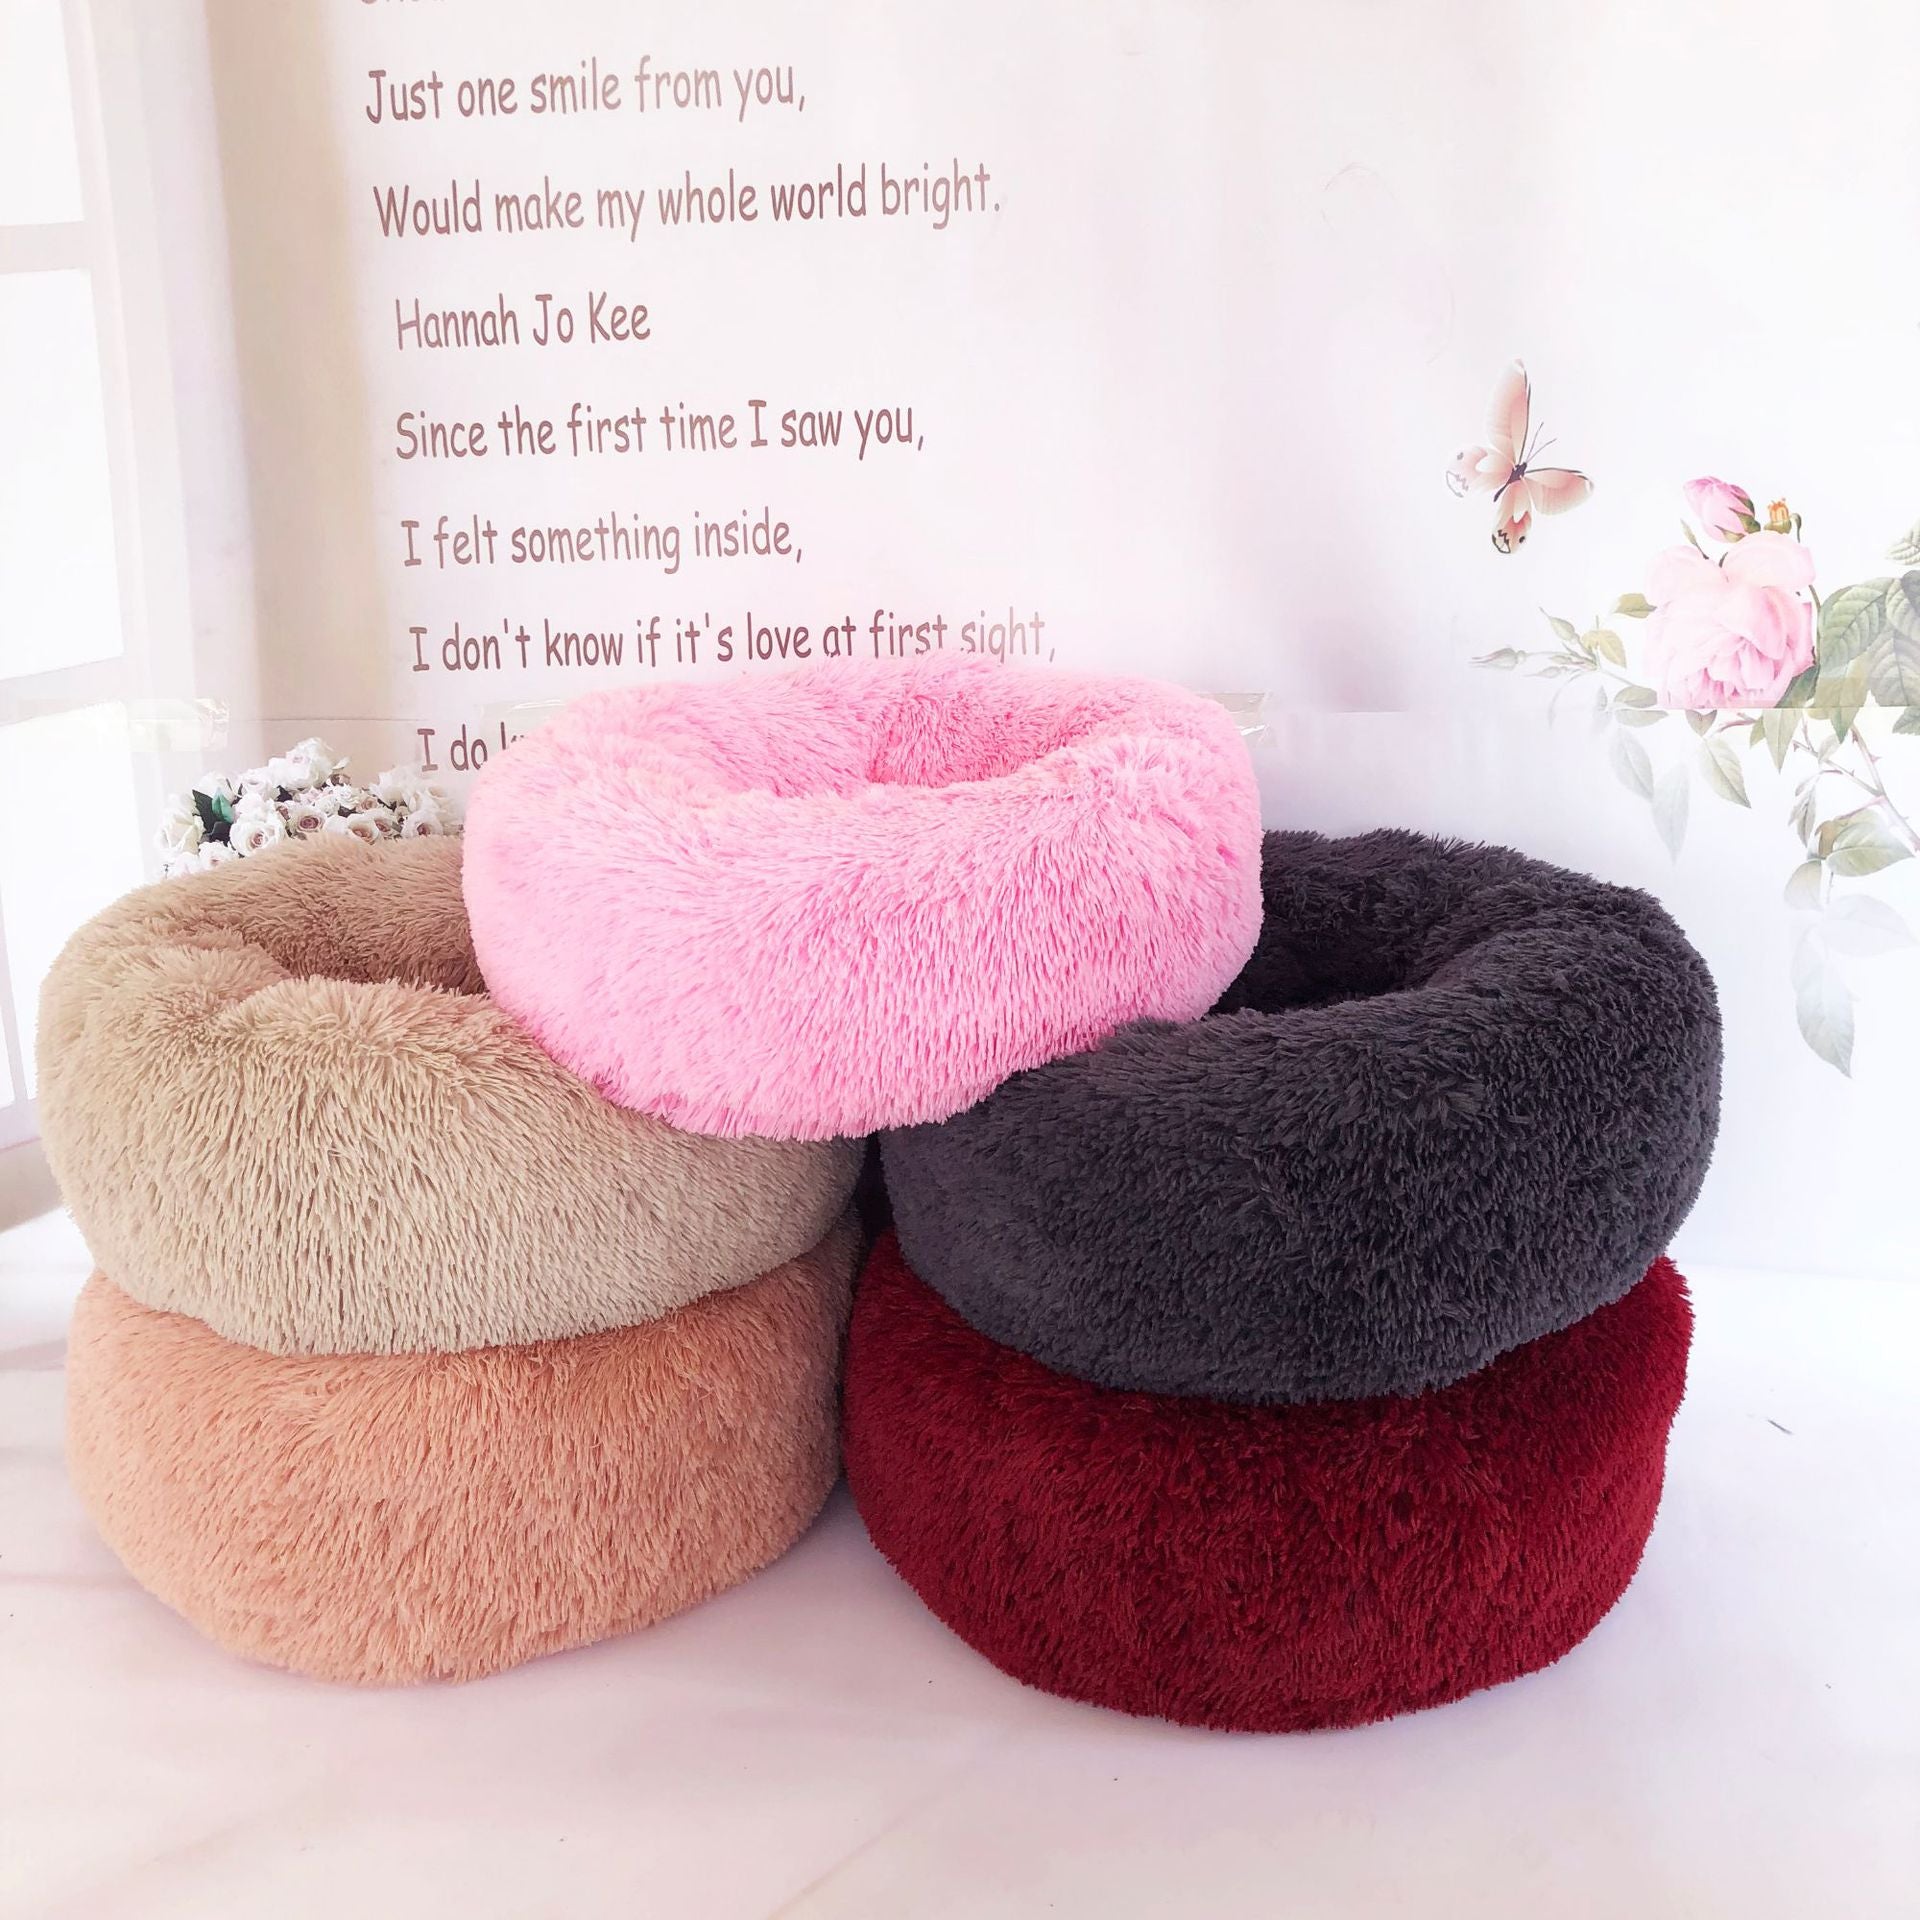 Dog Beds For Small Dogs Round Plush Cat Litter Kennel Pet Nest Mat Puppy Beds